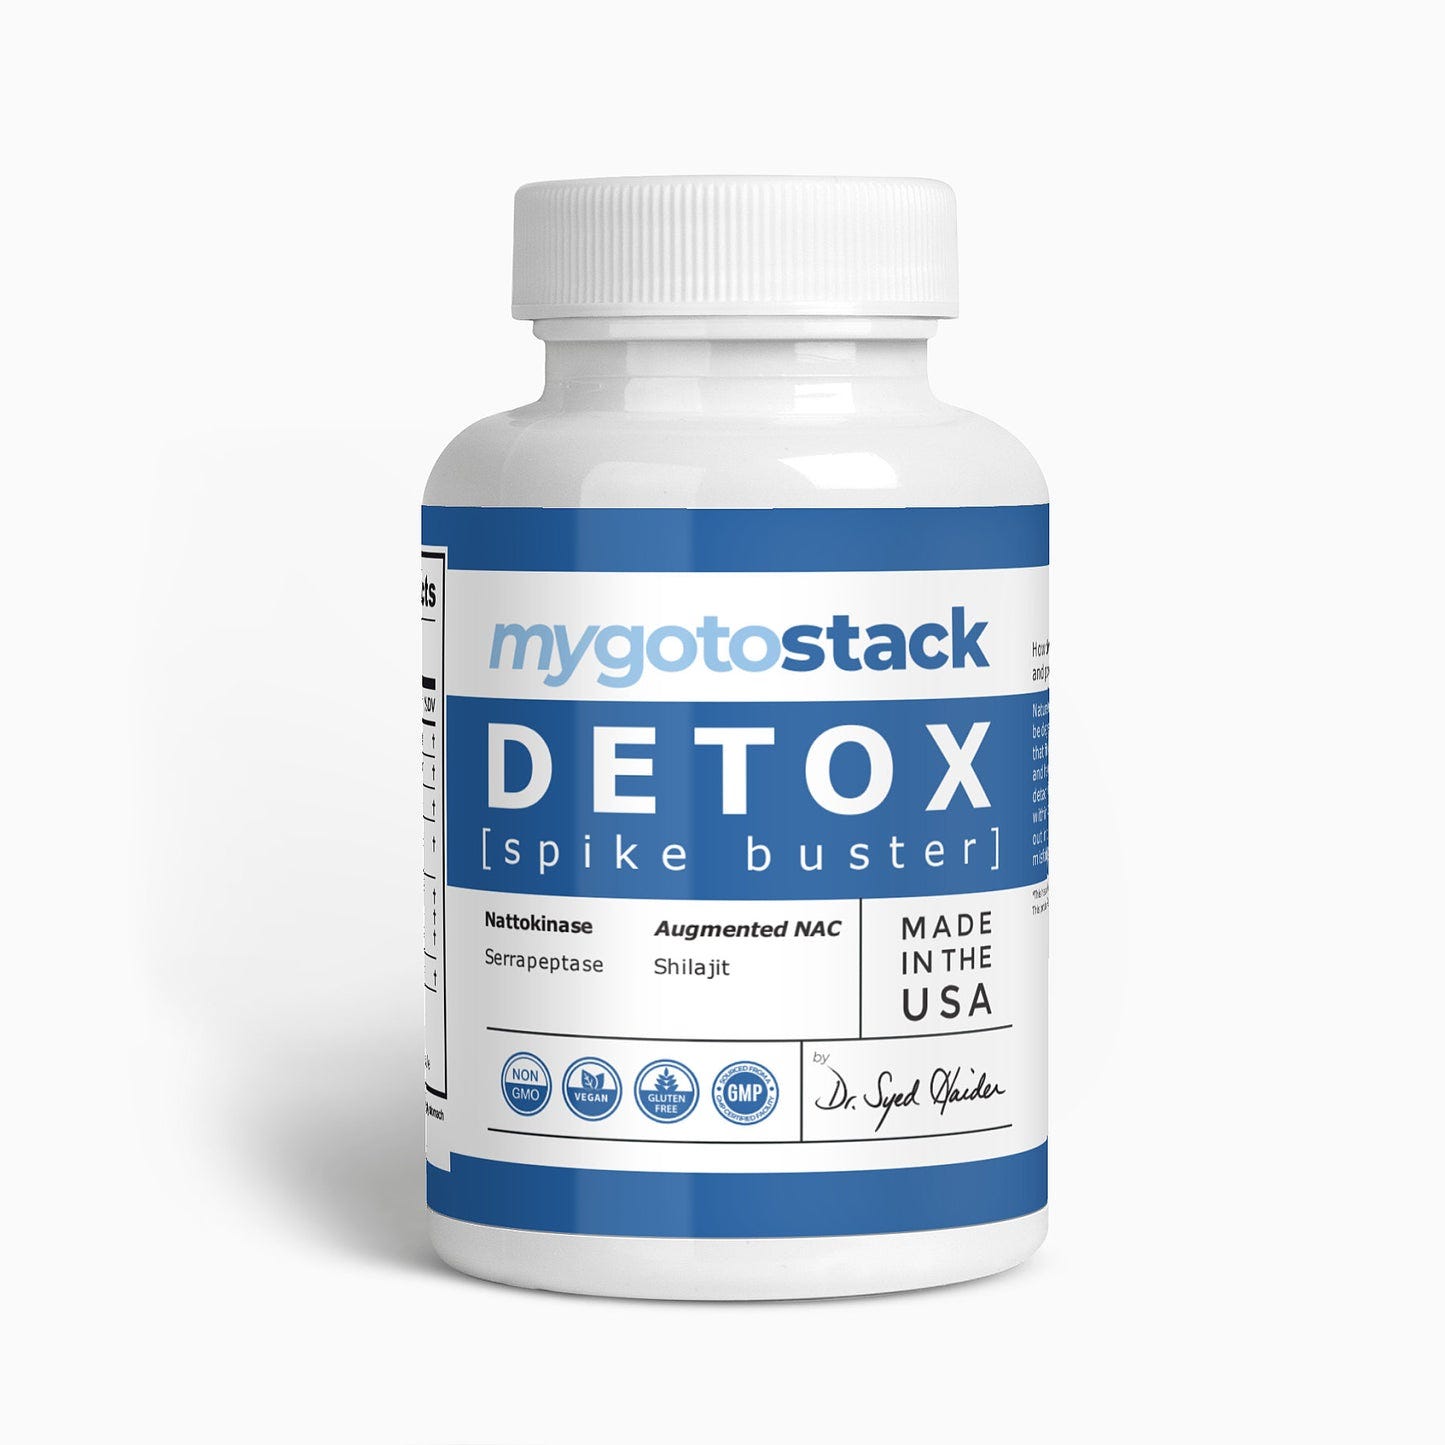 DETOX [spike buster] PRE-ORDER NOW: initial stock is limited! Shipping late November 2023.